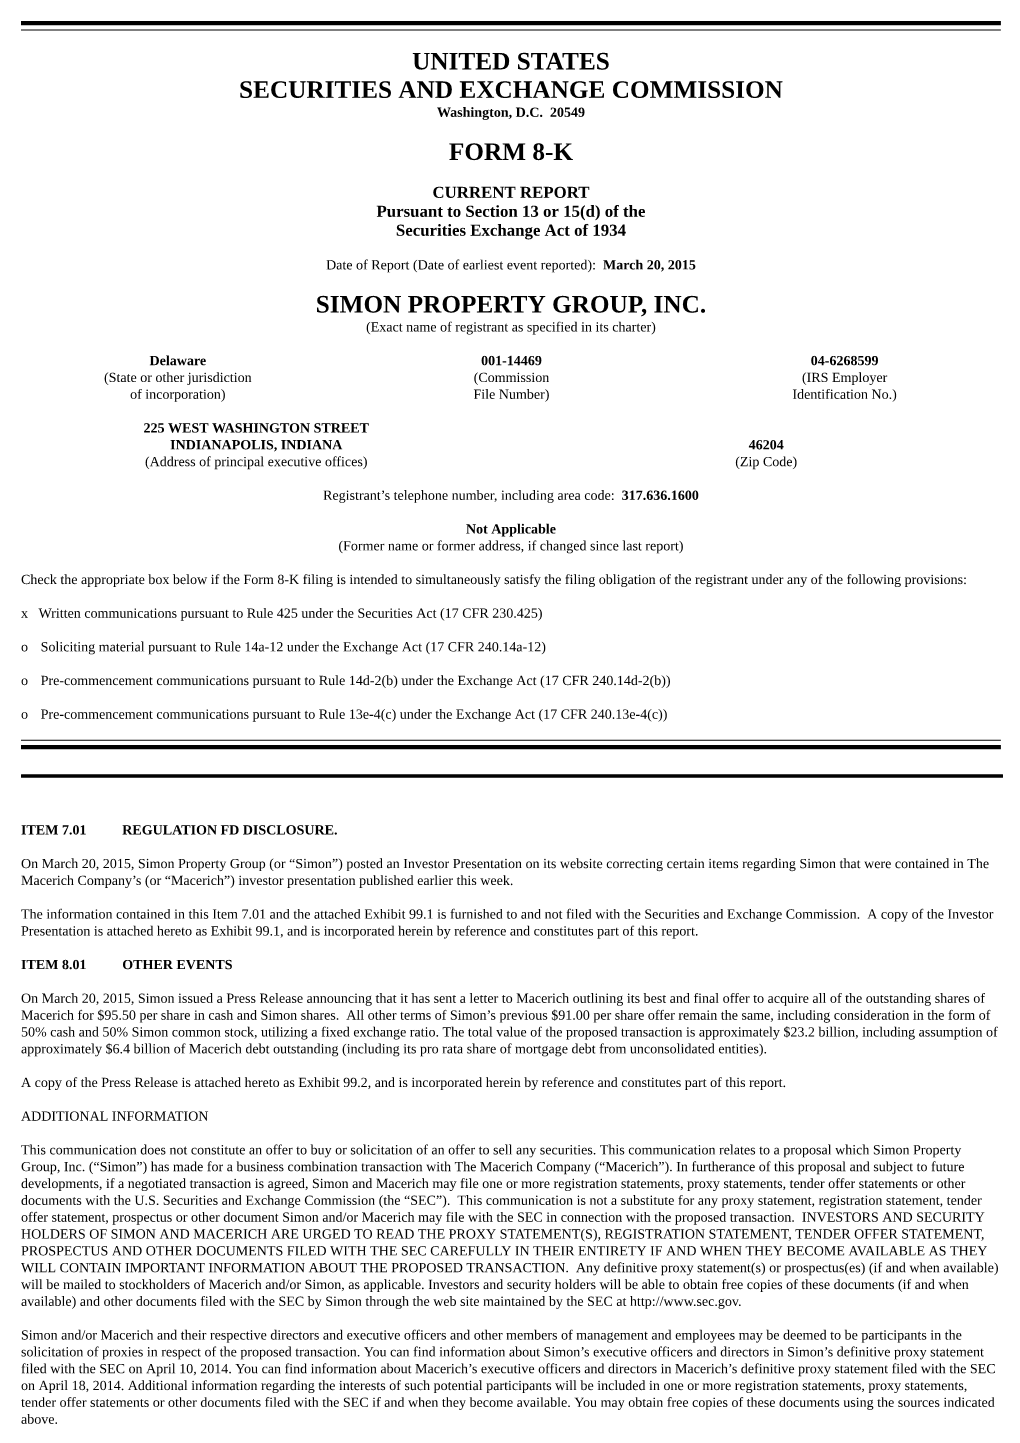 United States Securities and Exchange Commission Form 8-K Simon Property Group, Inc